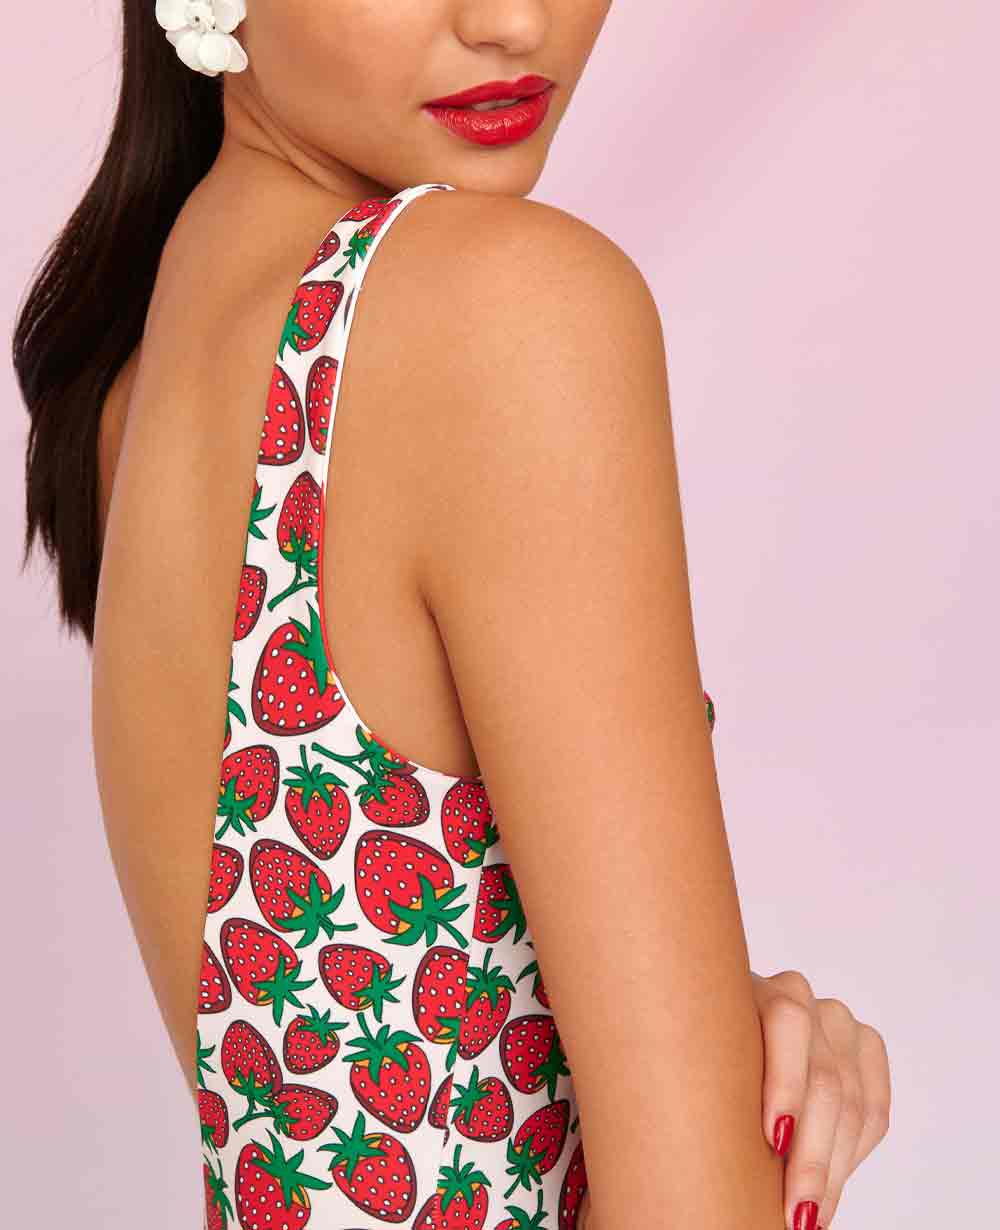 TWO-IN-ONE SWIMSUIT "RITA" - GREEN/RED/WHITE